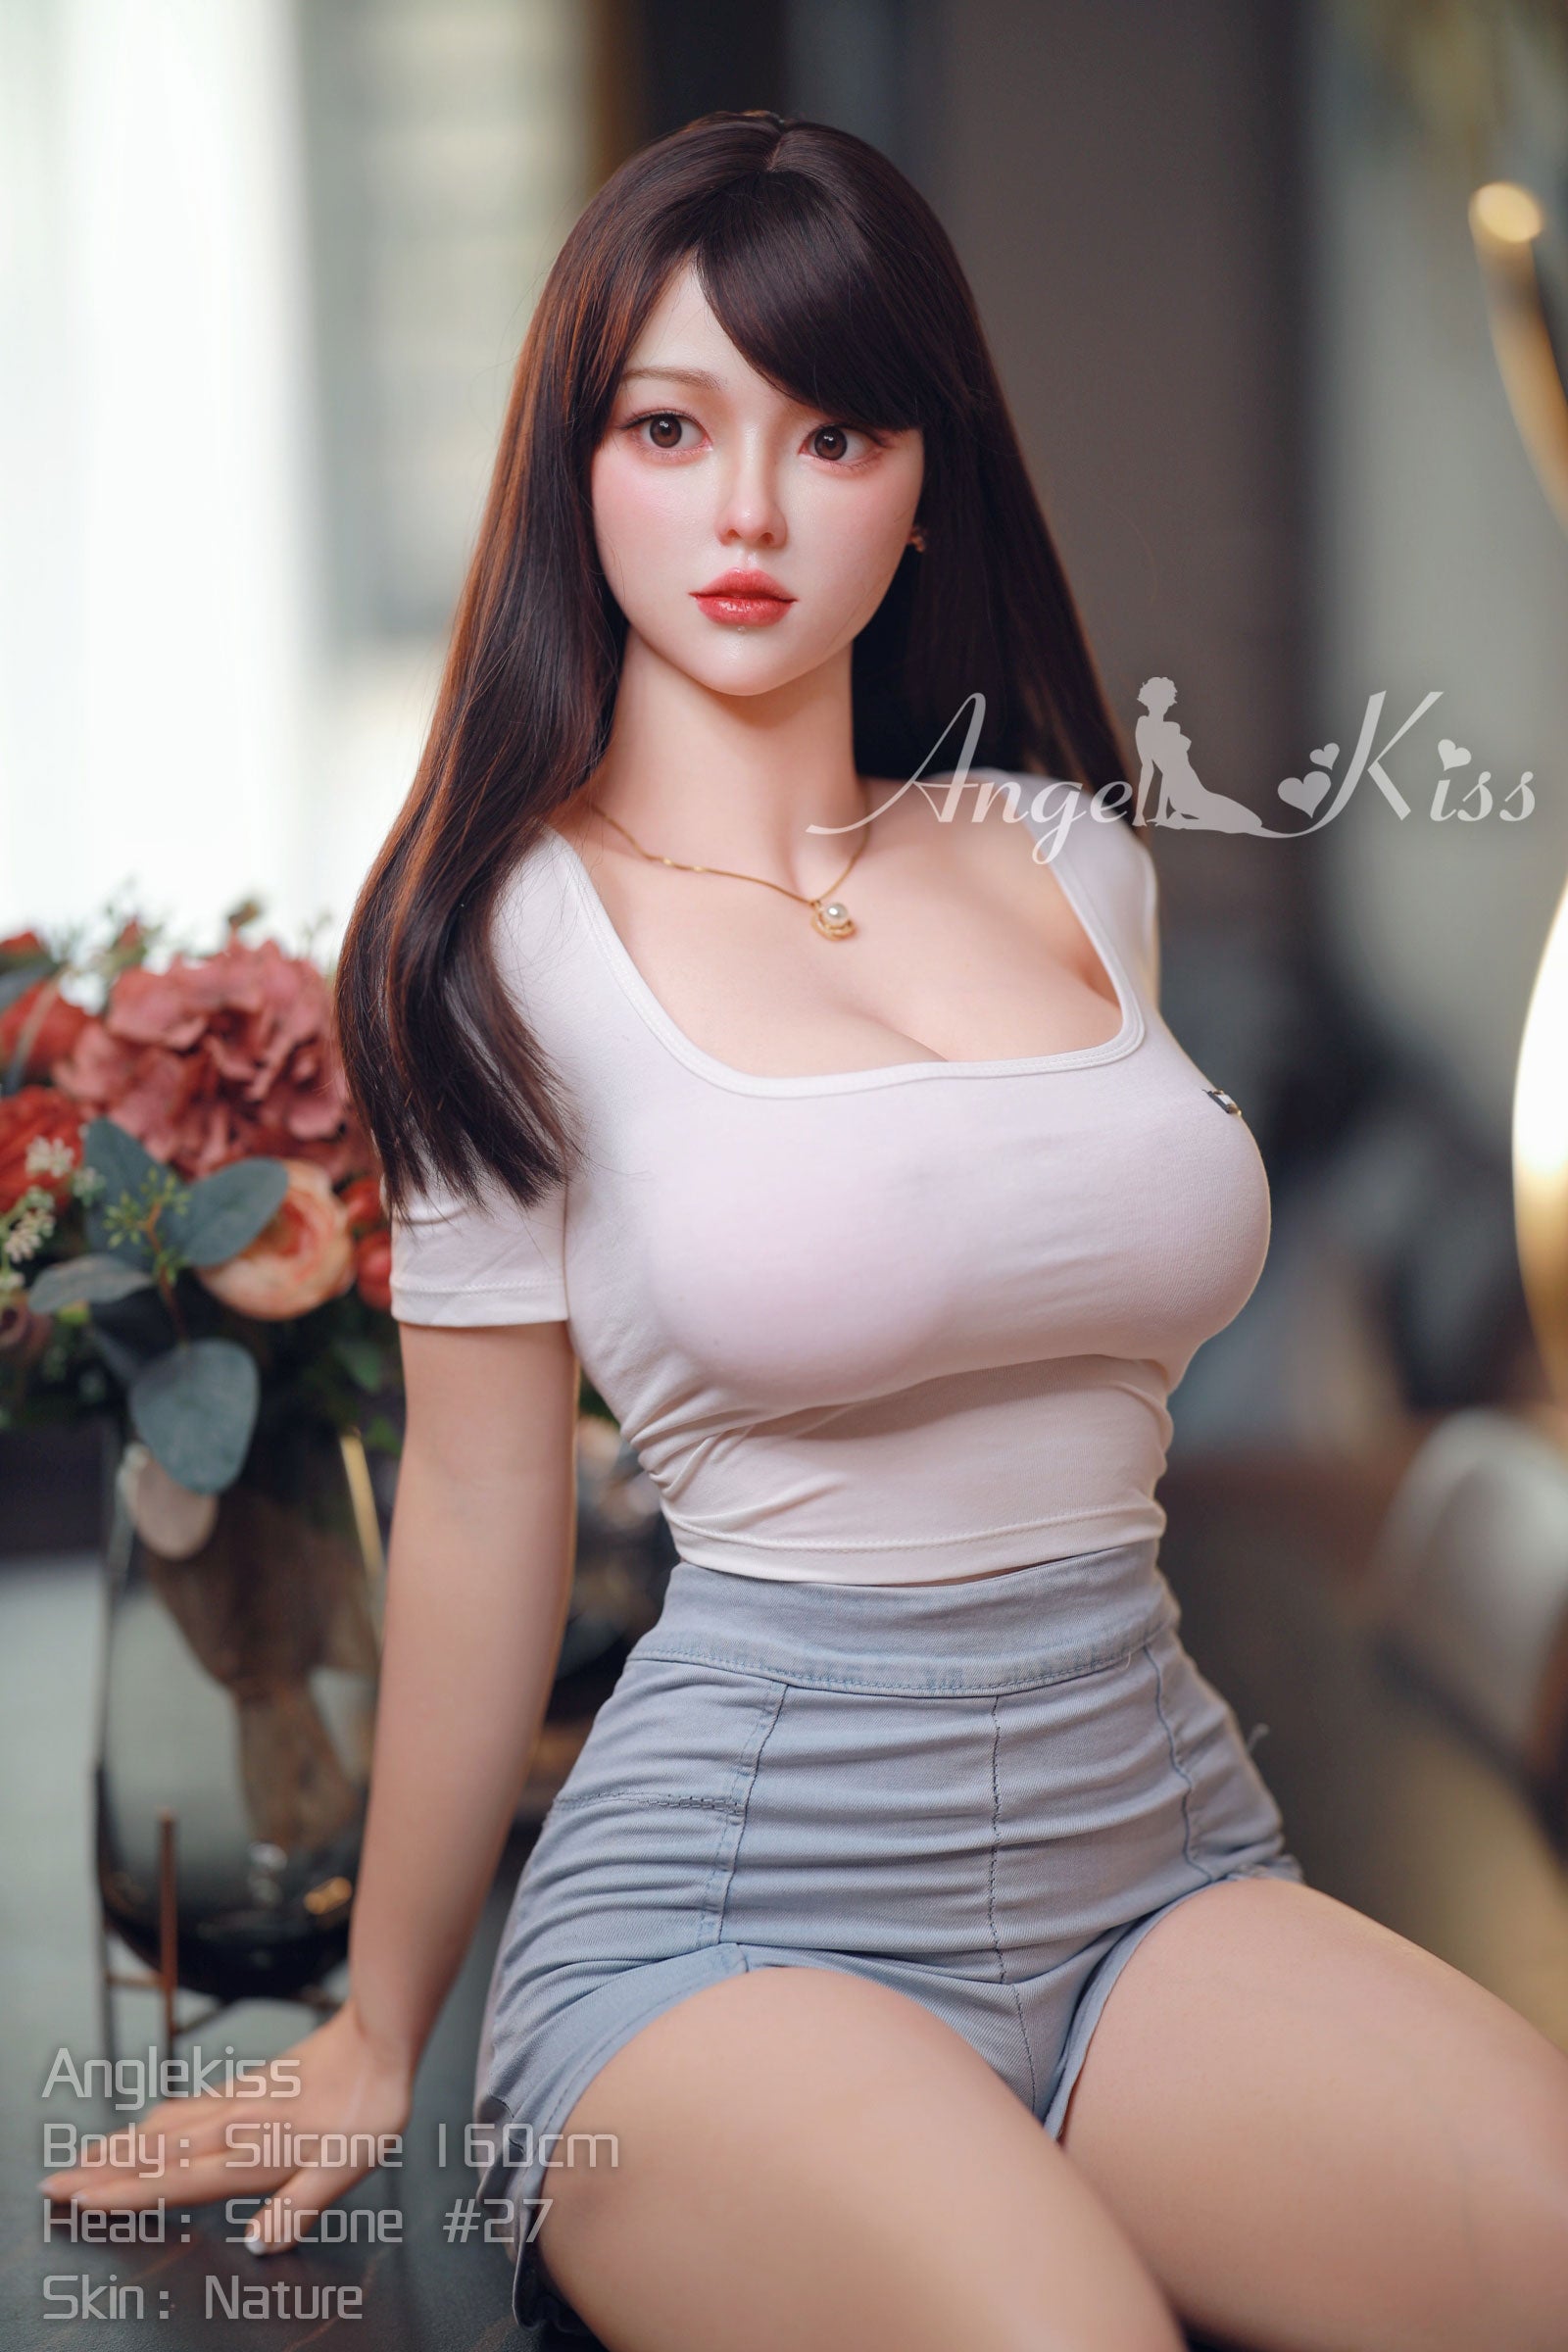 Angelkiss Doll 160 cm Silicone - Aiko | Buy Sex Dolls at DOLLS ACTUALLY